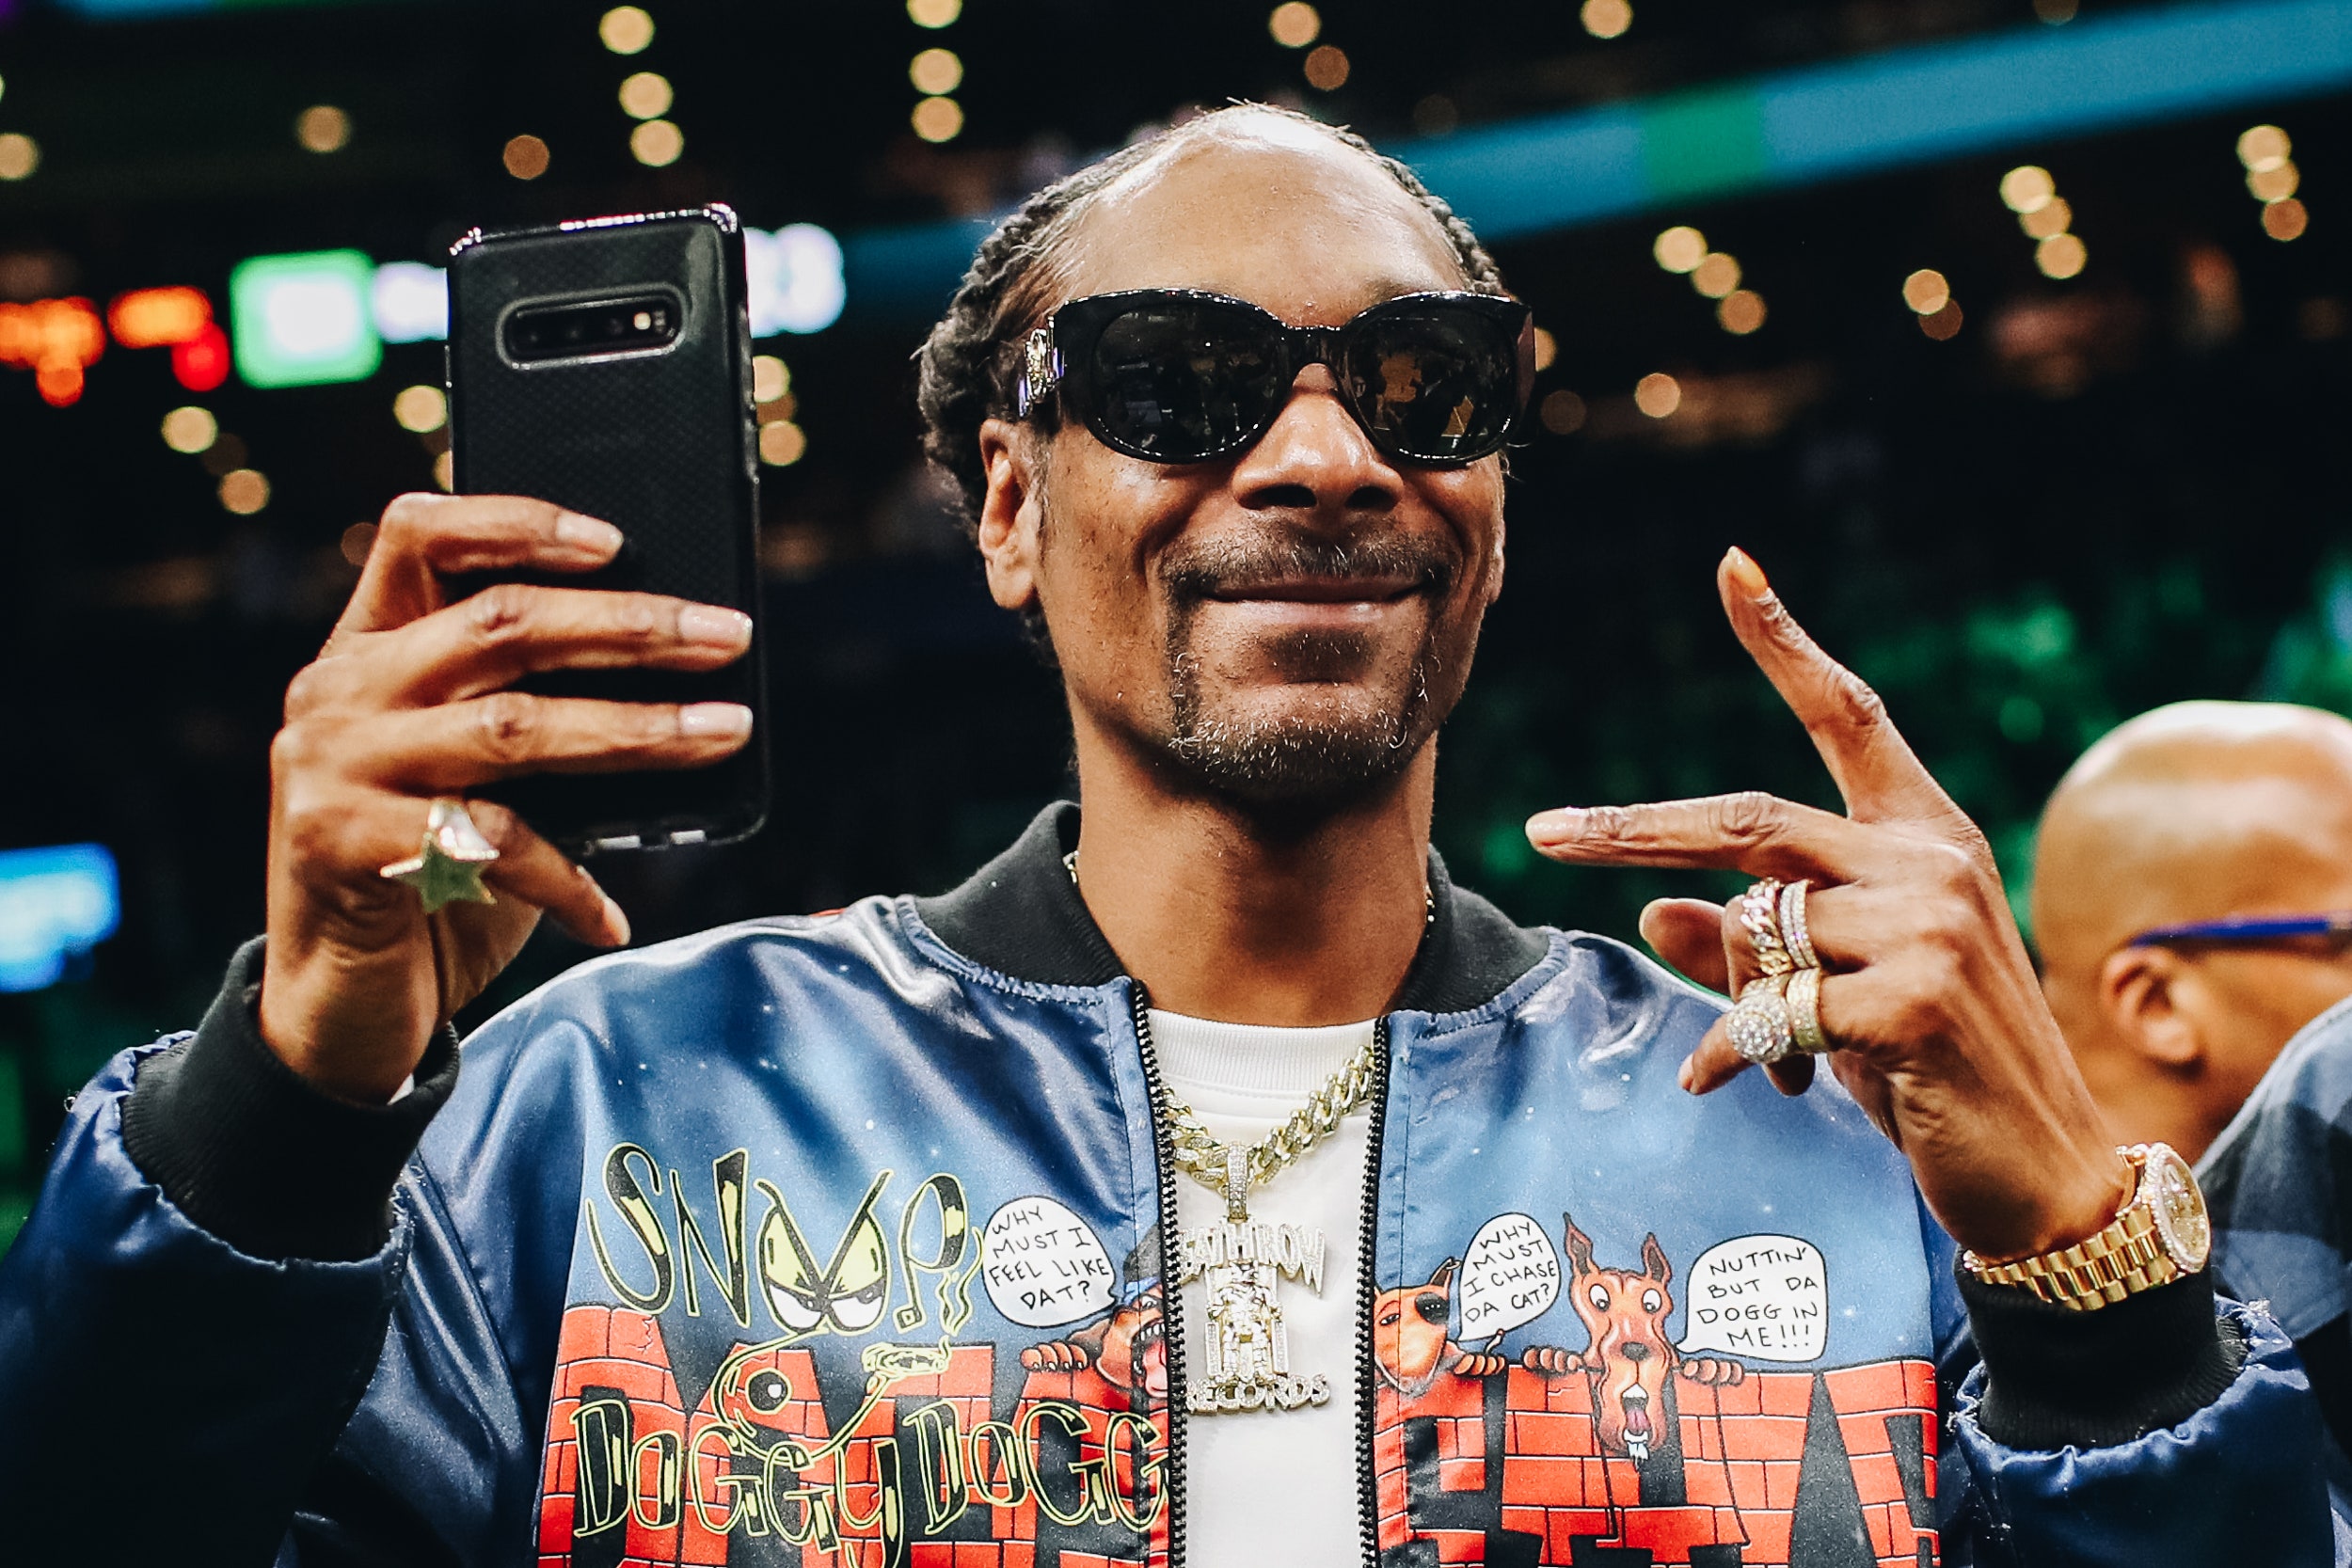 How Old is Snoop Dogg